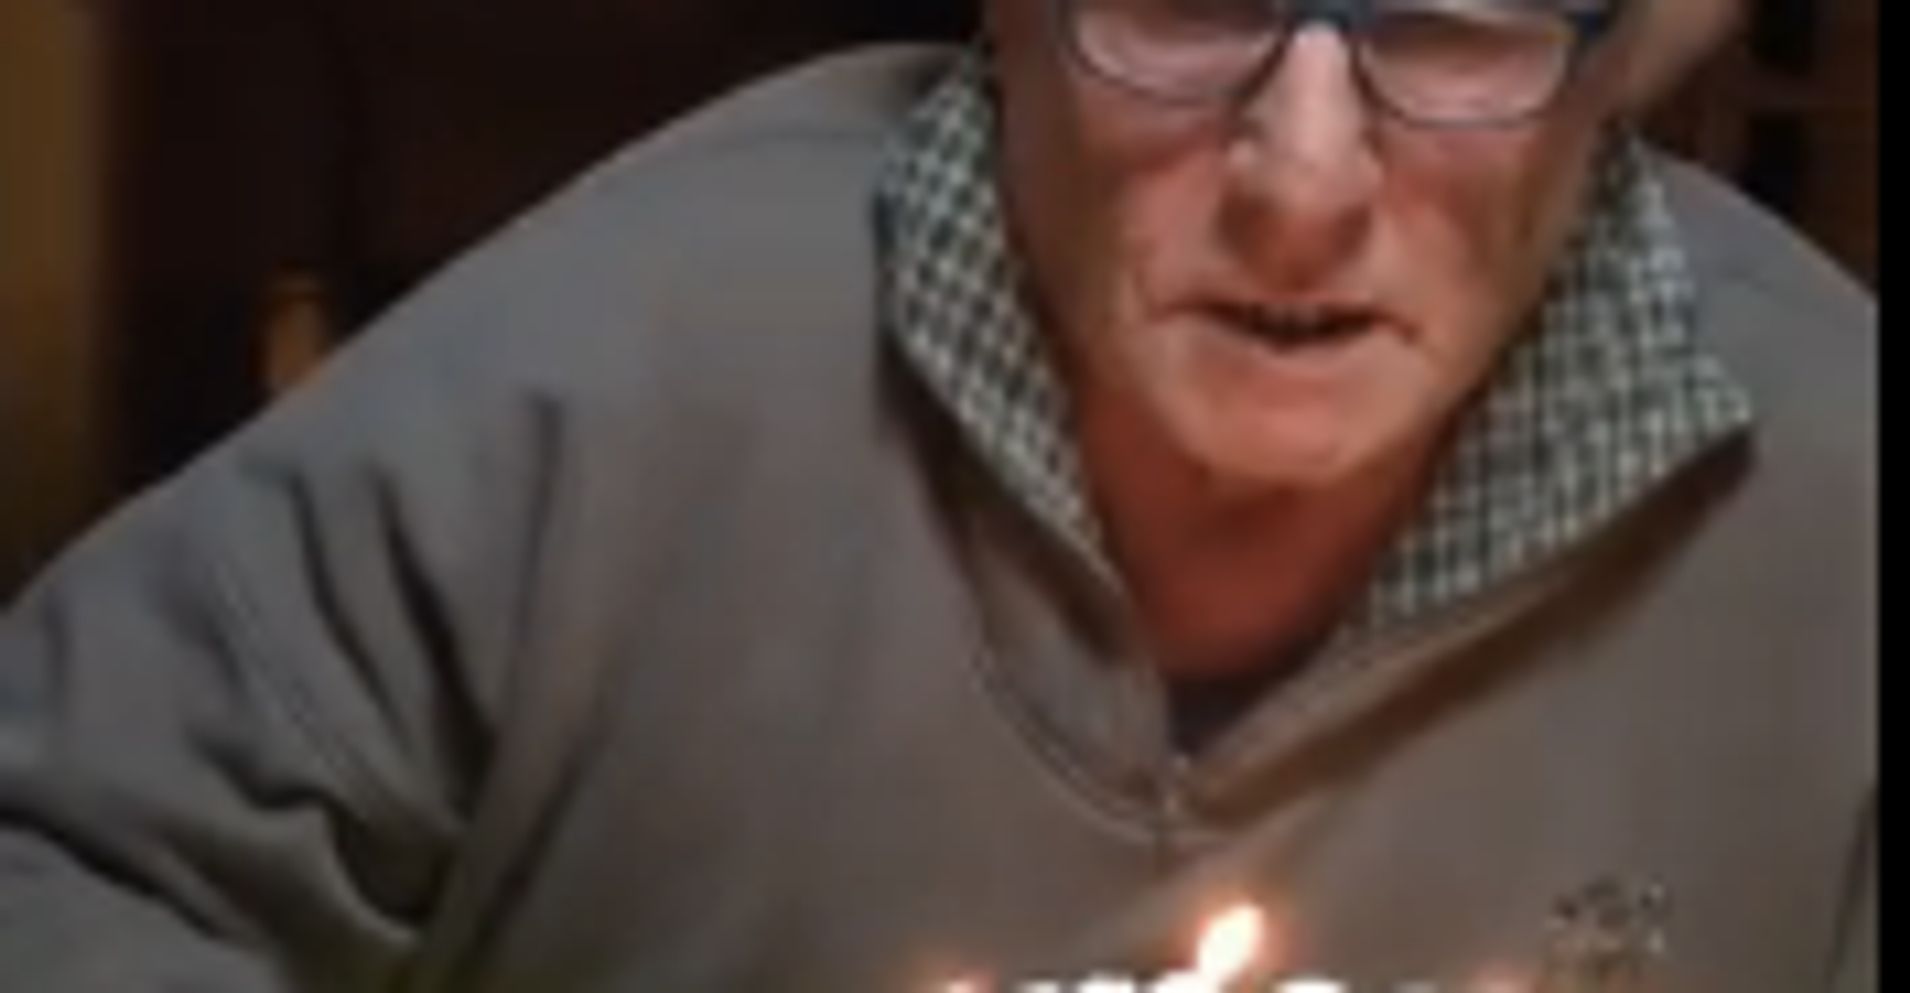 Grandpa Blows Out Bday Candles And His Epic Fail Takes The Cake HuffPost